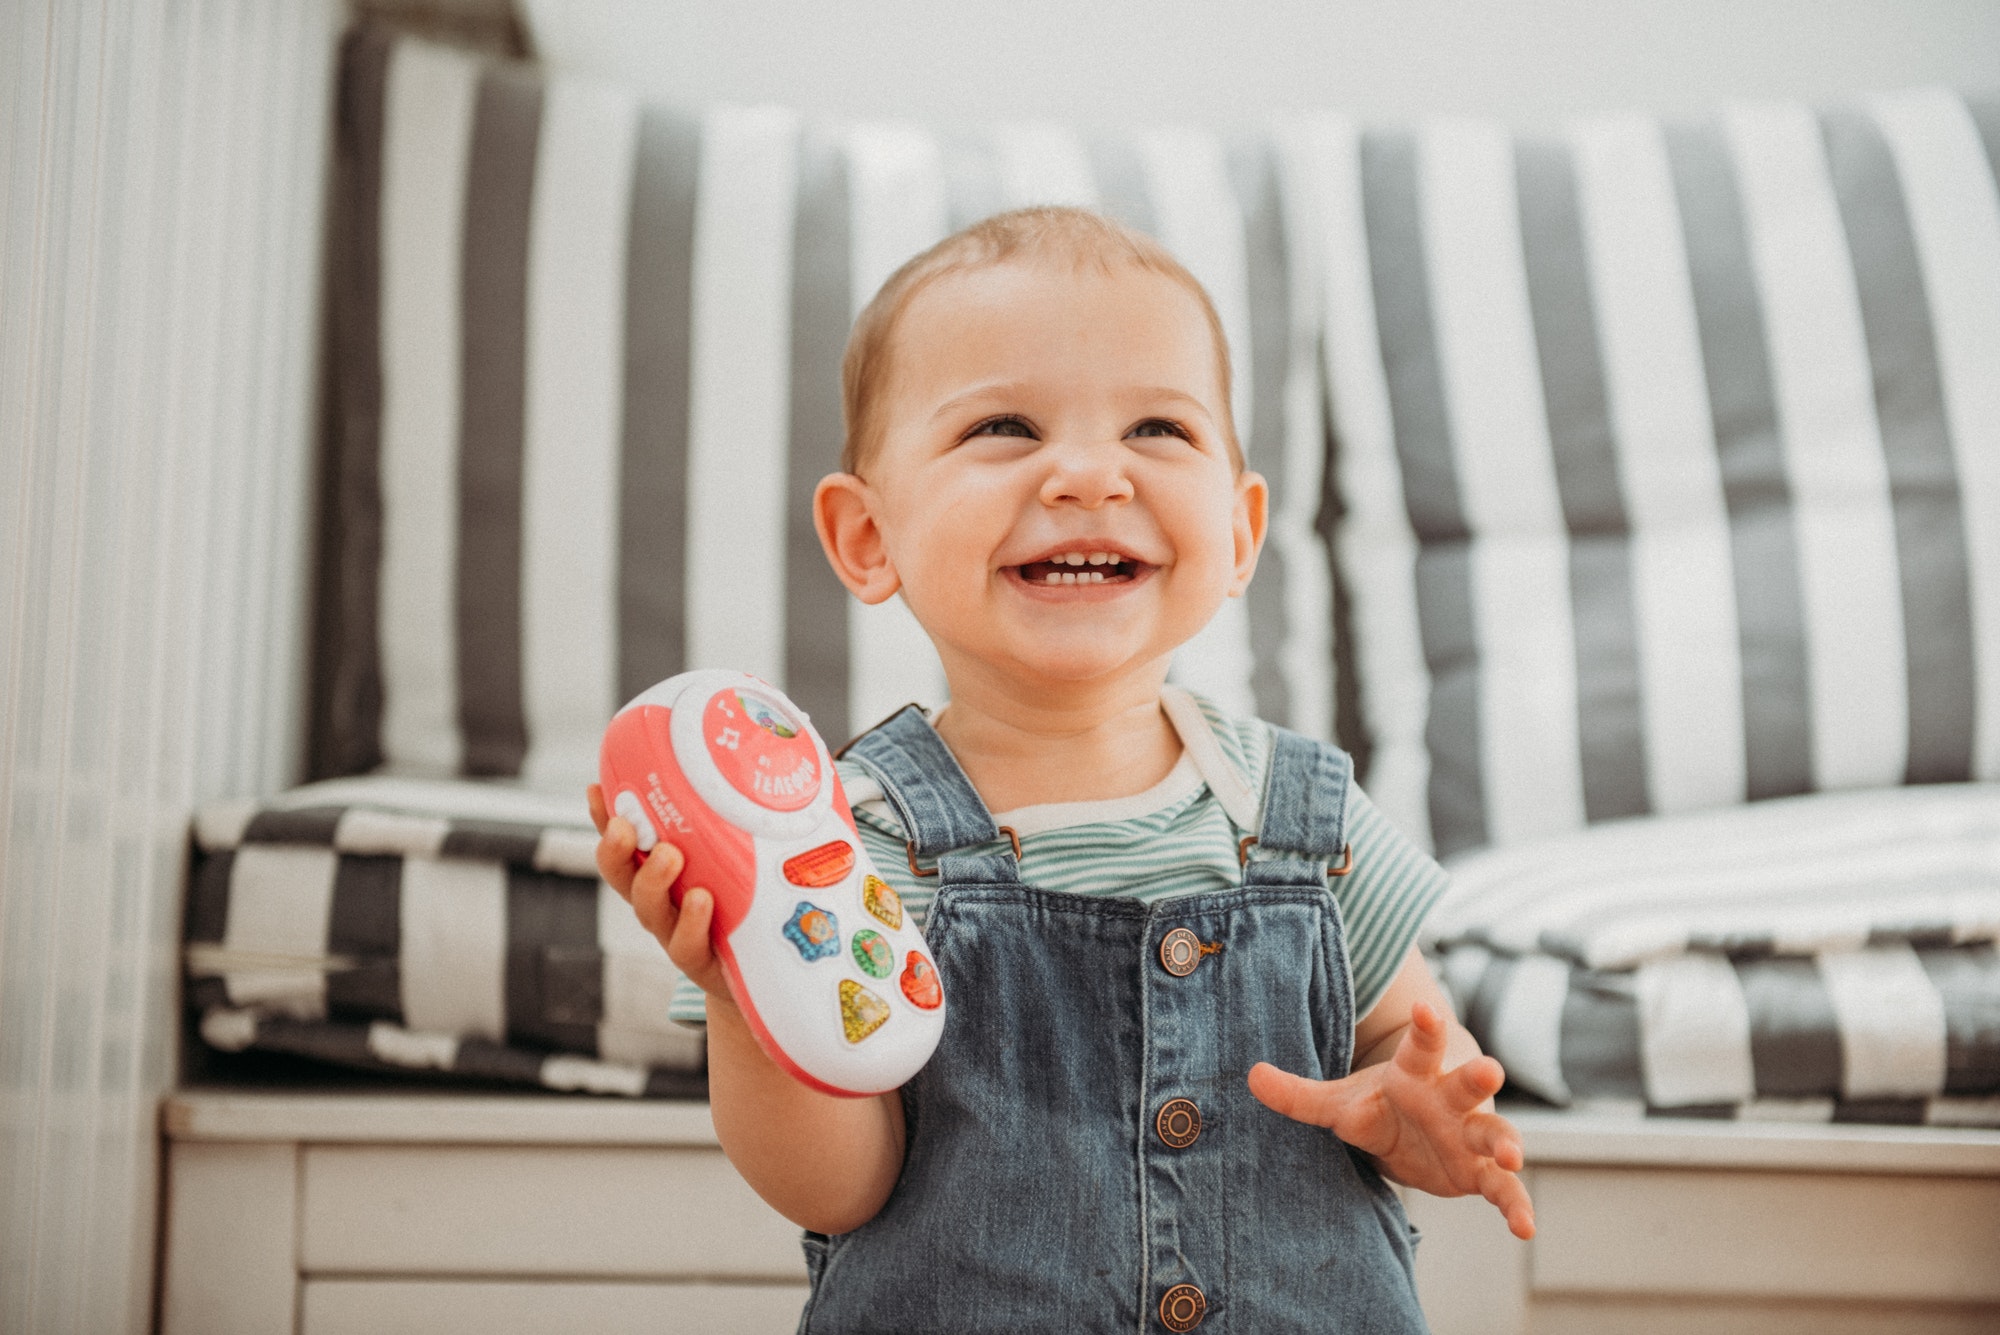 Infant girl holding toy phone and laughing emotional lifestyle portrait